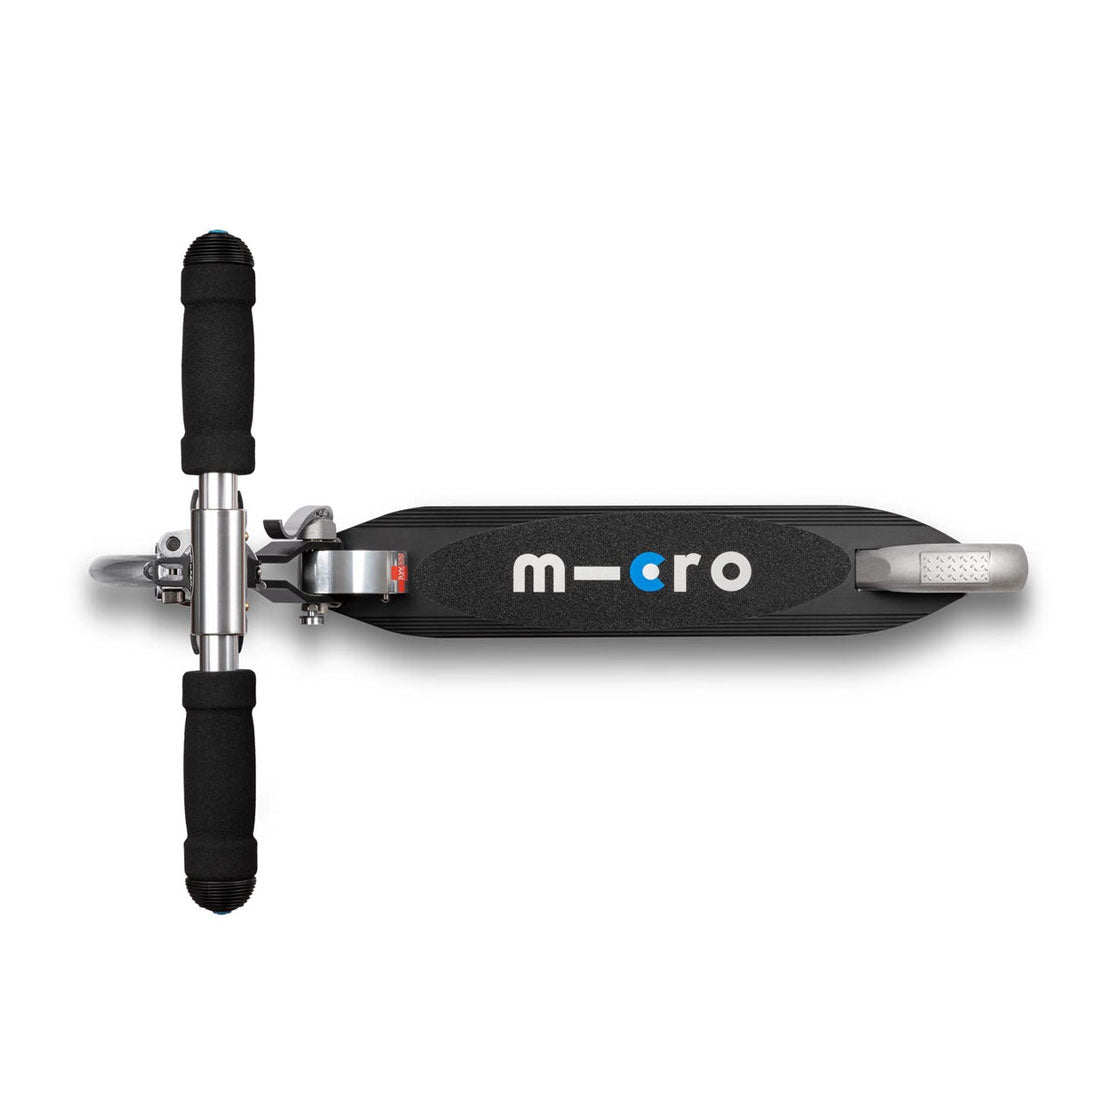 Micro Sprite Scooter - Black Scooter Completes Rec